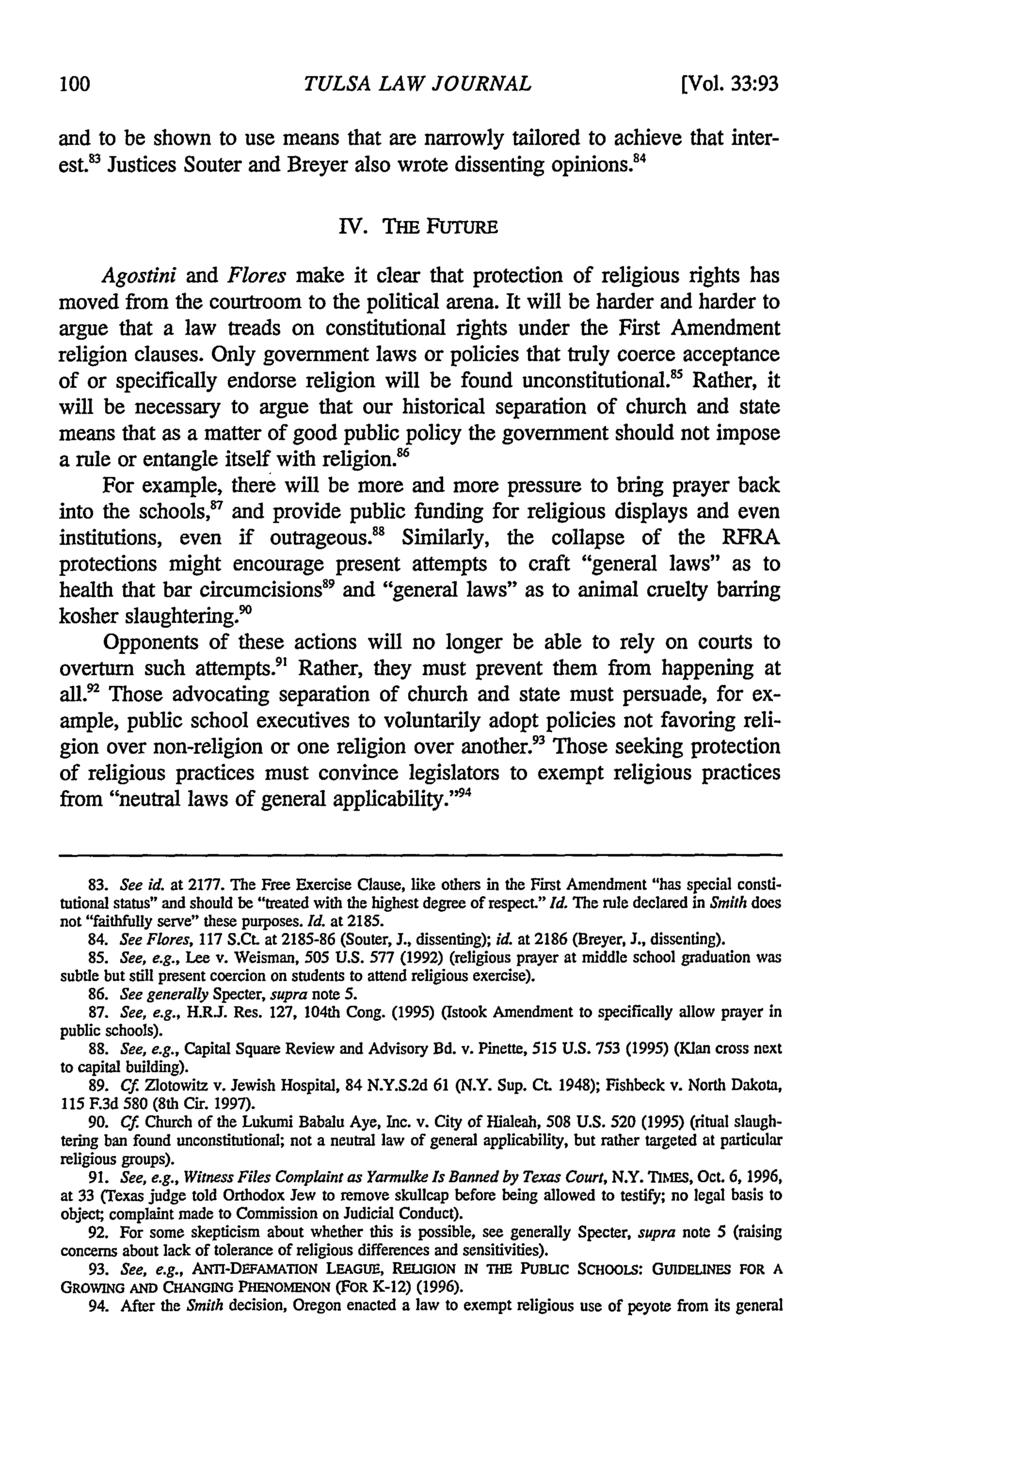 Tulsa Law Review, Vol. 33 [1997], Iss. 1, Art. 8 TULSA LAW JOURNAL [Vol. 33:93 and to be shown to use means that are narrowly tailored to achieve that interest.